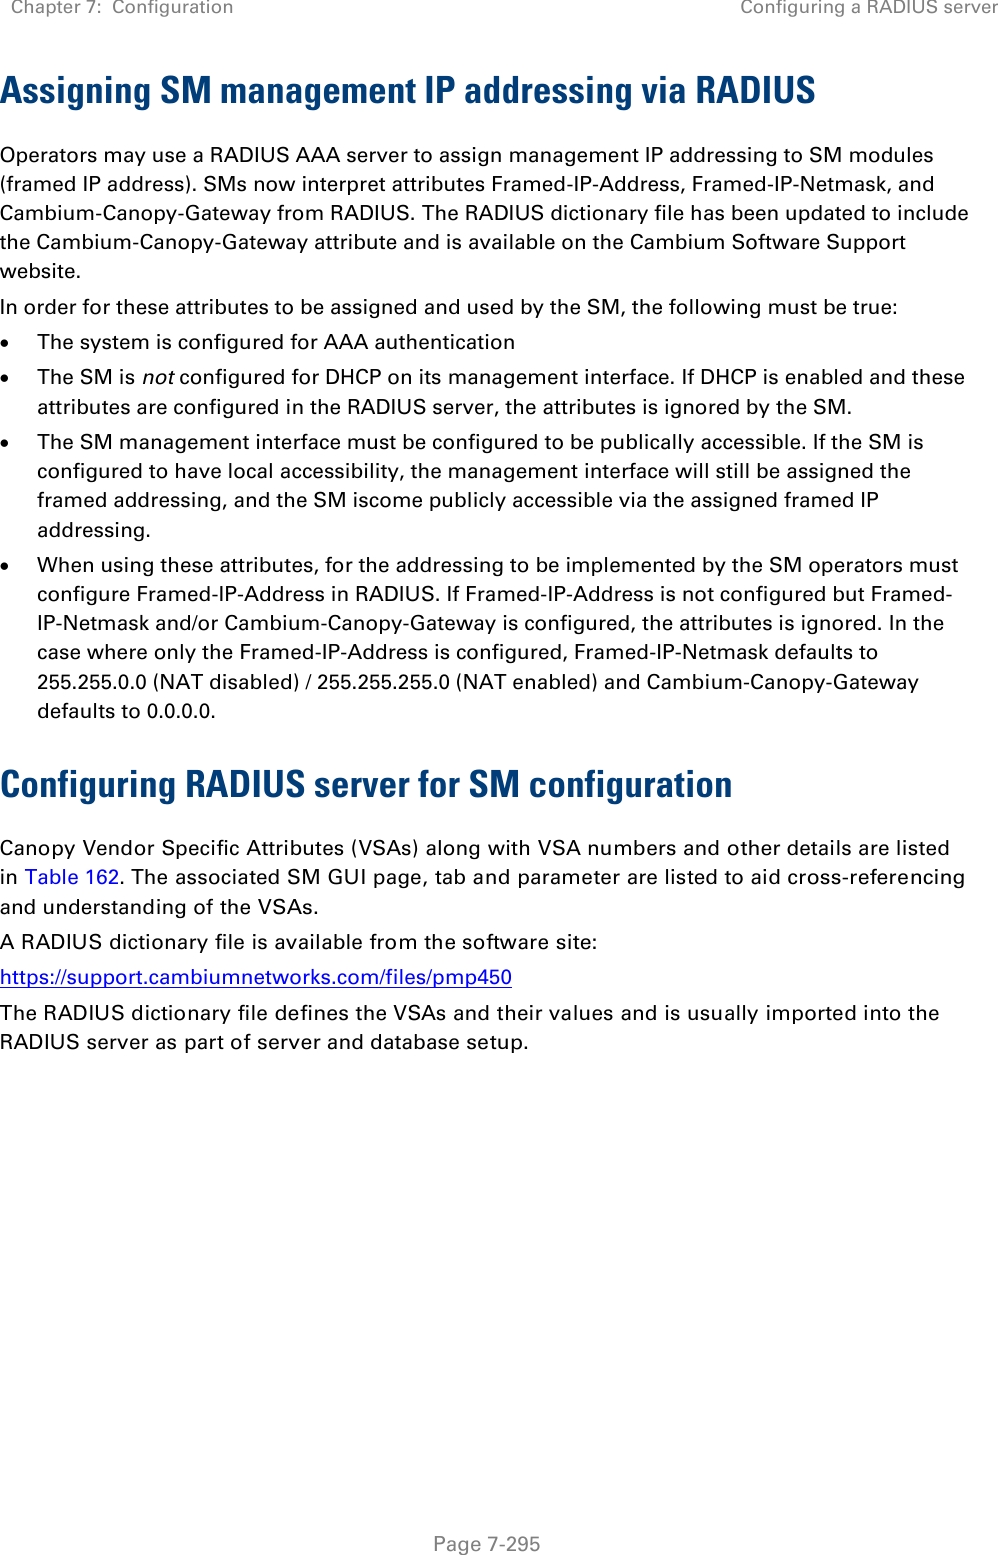 Chapter 7:  Configuration Configuring a RADIUS server   Page 7-295 Assigning SM management IP addressing via RADIUS Operators may use a RADIUS AAA server to assign management IP addressing to SM modules (framed IP address). SMs now interpret attributes Framed-IP-Address, Framed-IP-Netmask, and Cambium-Canopy-Gateway from RADIUS. The RADIUS dictionary file has been updated to include the Cambium-Canopy-Gateway attribute and is available on the Cambium Software Support website. In order for these attributes to be assigned and used by the SM, the following must be true:  The system is configured for AAA authentication  The SM is not configured for DHCP on its management interface. If DHCP is enabled and these attributes are configured in the RADIUS server, the attributes is ignored by the SM.  The SM management interface must be configured to be publically accessible. If the SM is configured to have local accessibility, the management interface will still be assigned the framed addressing, and the SM iscome publicly accessible via the assigned framed IP addressing.  When using these attributes, for the addressing to be implemented by the SM operators must configure Framed-IP-Address in RADIUS. If Framed-IP-Address is not configured but Framed-IP-Netmask and/or Cambium-Canopy-Gateway is configured, the attributes is ignored. In the case where only the Framed-IP-Address is configured, Framed-IP-Netmask defaults to 255.255.0.0 (NAT disabled) / 255.255.255.0 (NAT enabled) and Cambium-Canopy-Gateway defaults to 0.0.0.0. Configuring RADIUS server for SM configuration Canopy Vendor Specific Attributes (VSAs) along with VSA numbers and other details are listed in Table 162. The associated SM GUI page, tab and parameter are listed to aid cross-referencing and understanding of the VSAs. A RADIUS dictionary file is available from the software site:  https://support.cambiumnetworks.com/files/pmp450 The RADIUS dictionary file defines the VSAs and their values and is usually imported into the RADIUS server as part of server and database setup.  